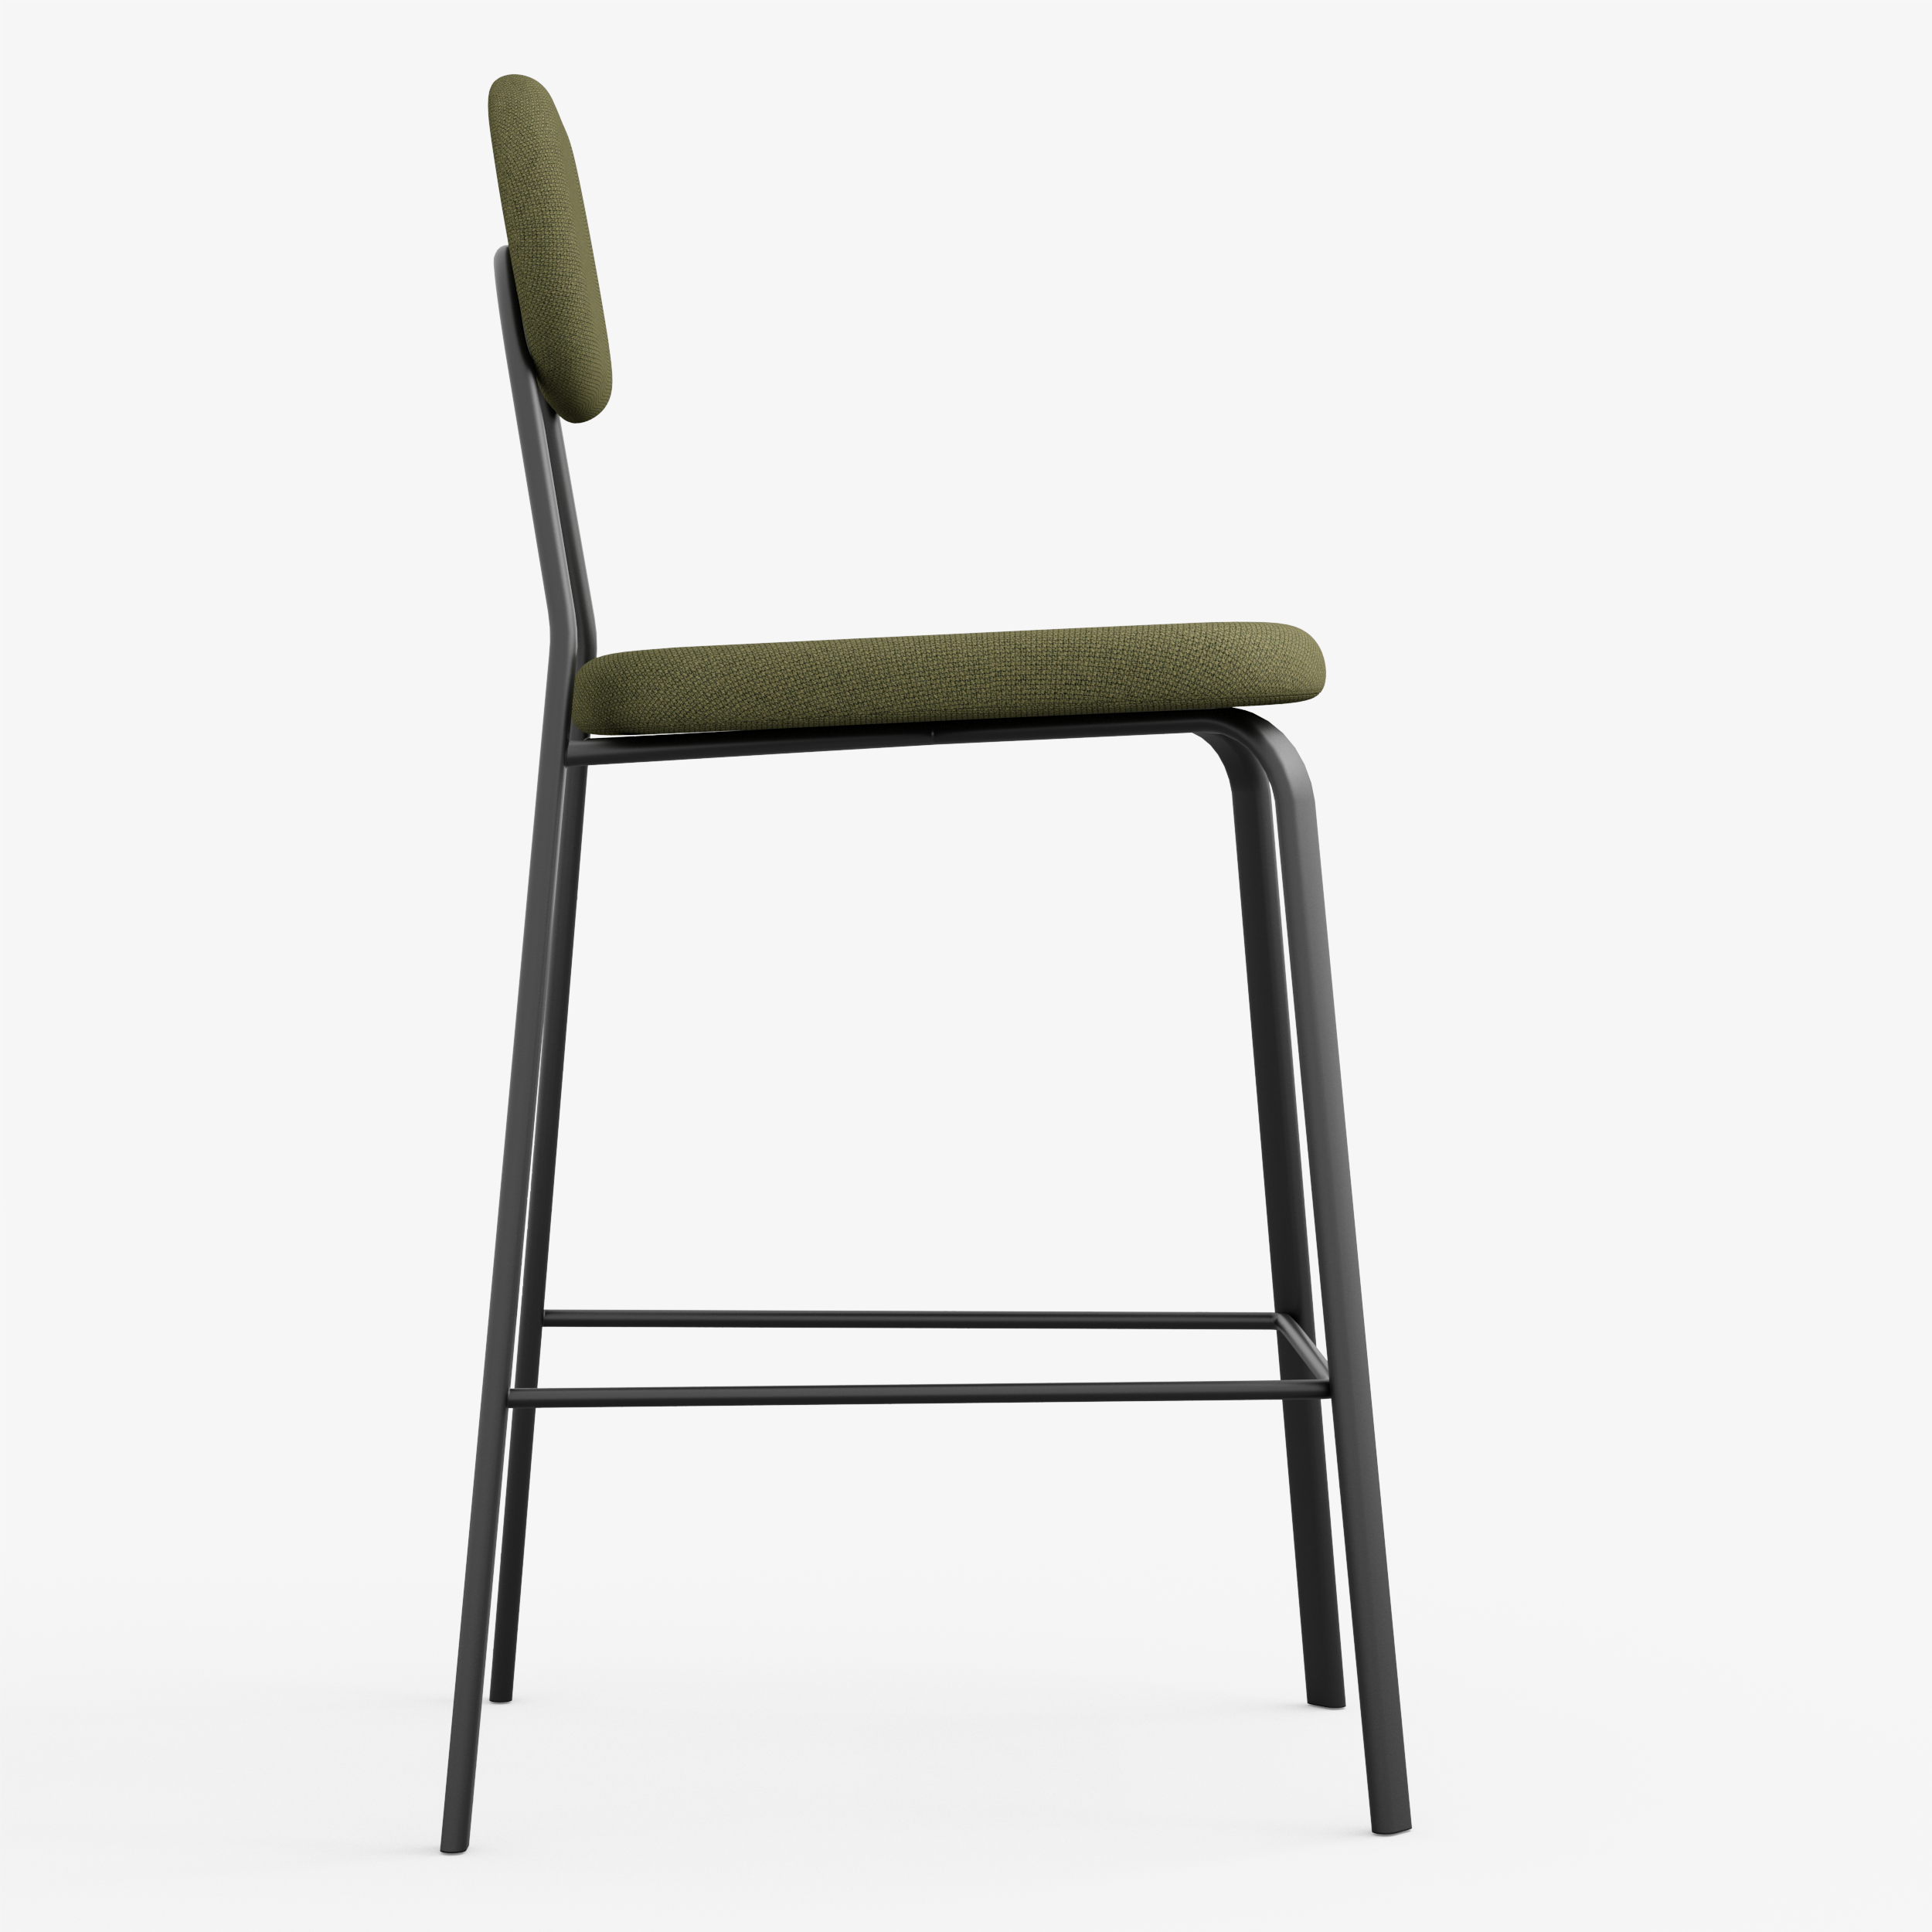 Form - Chair / High (Oval, Olive Green)